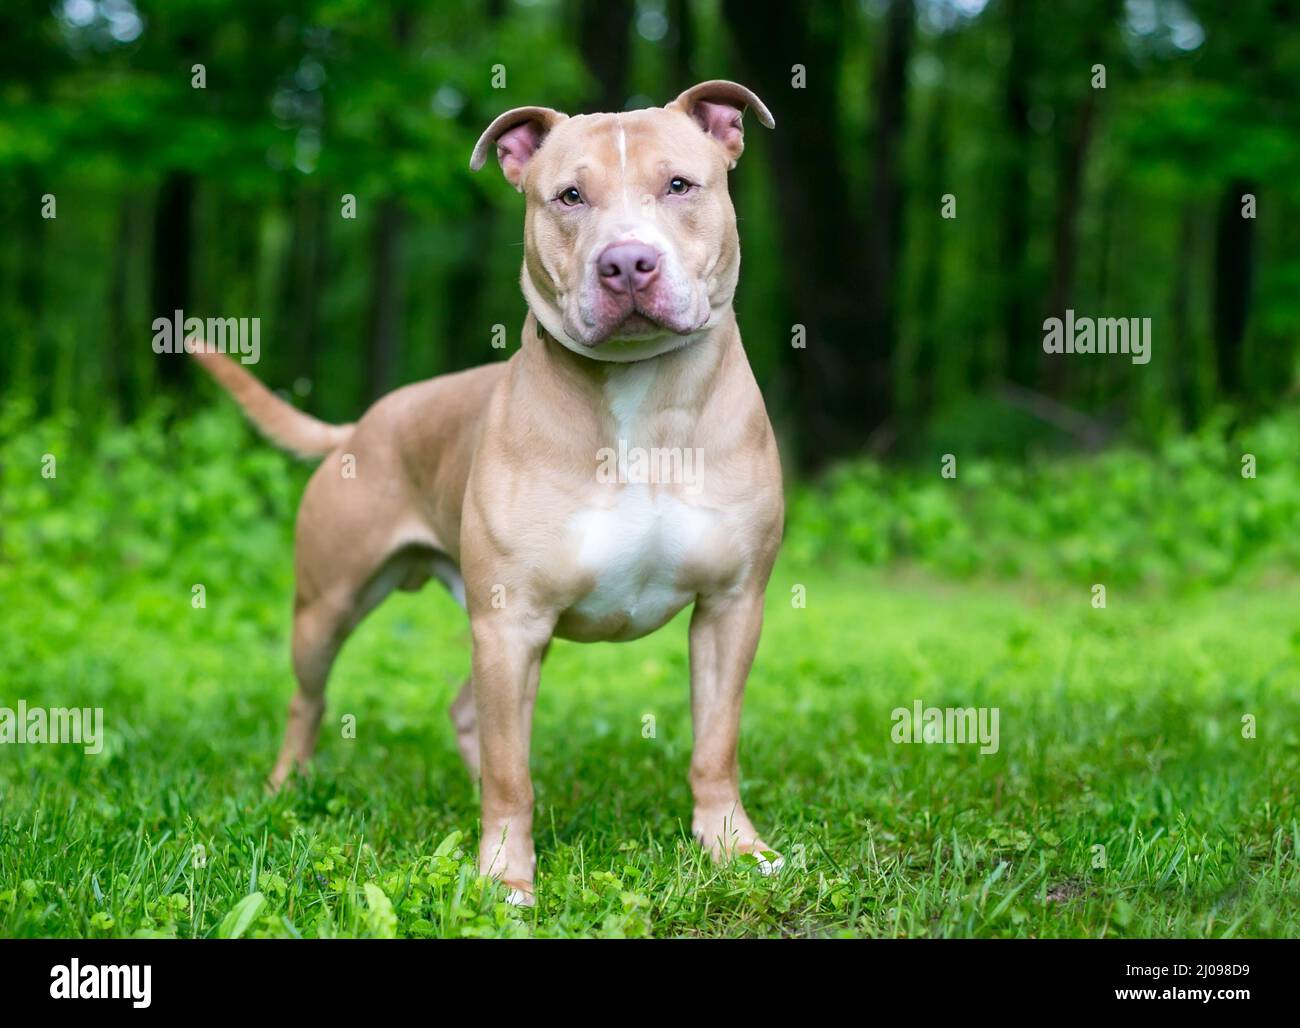 A Pit Bull Terrier x Shar Pei mixed breed dog standing outdoors and looking at the camera Stock Photo